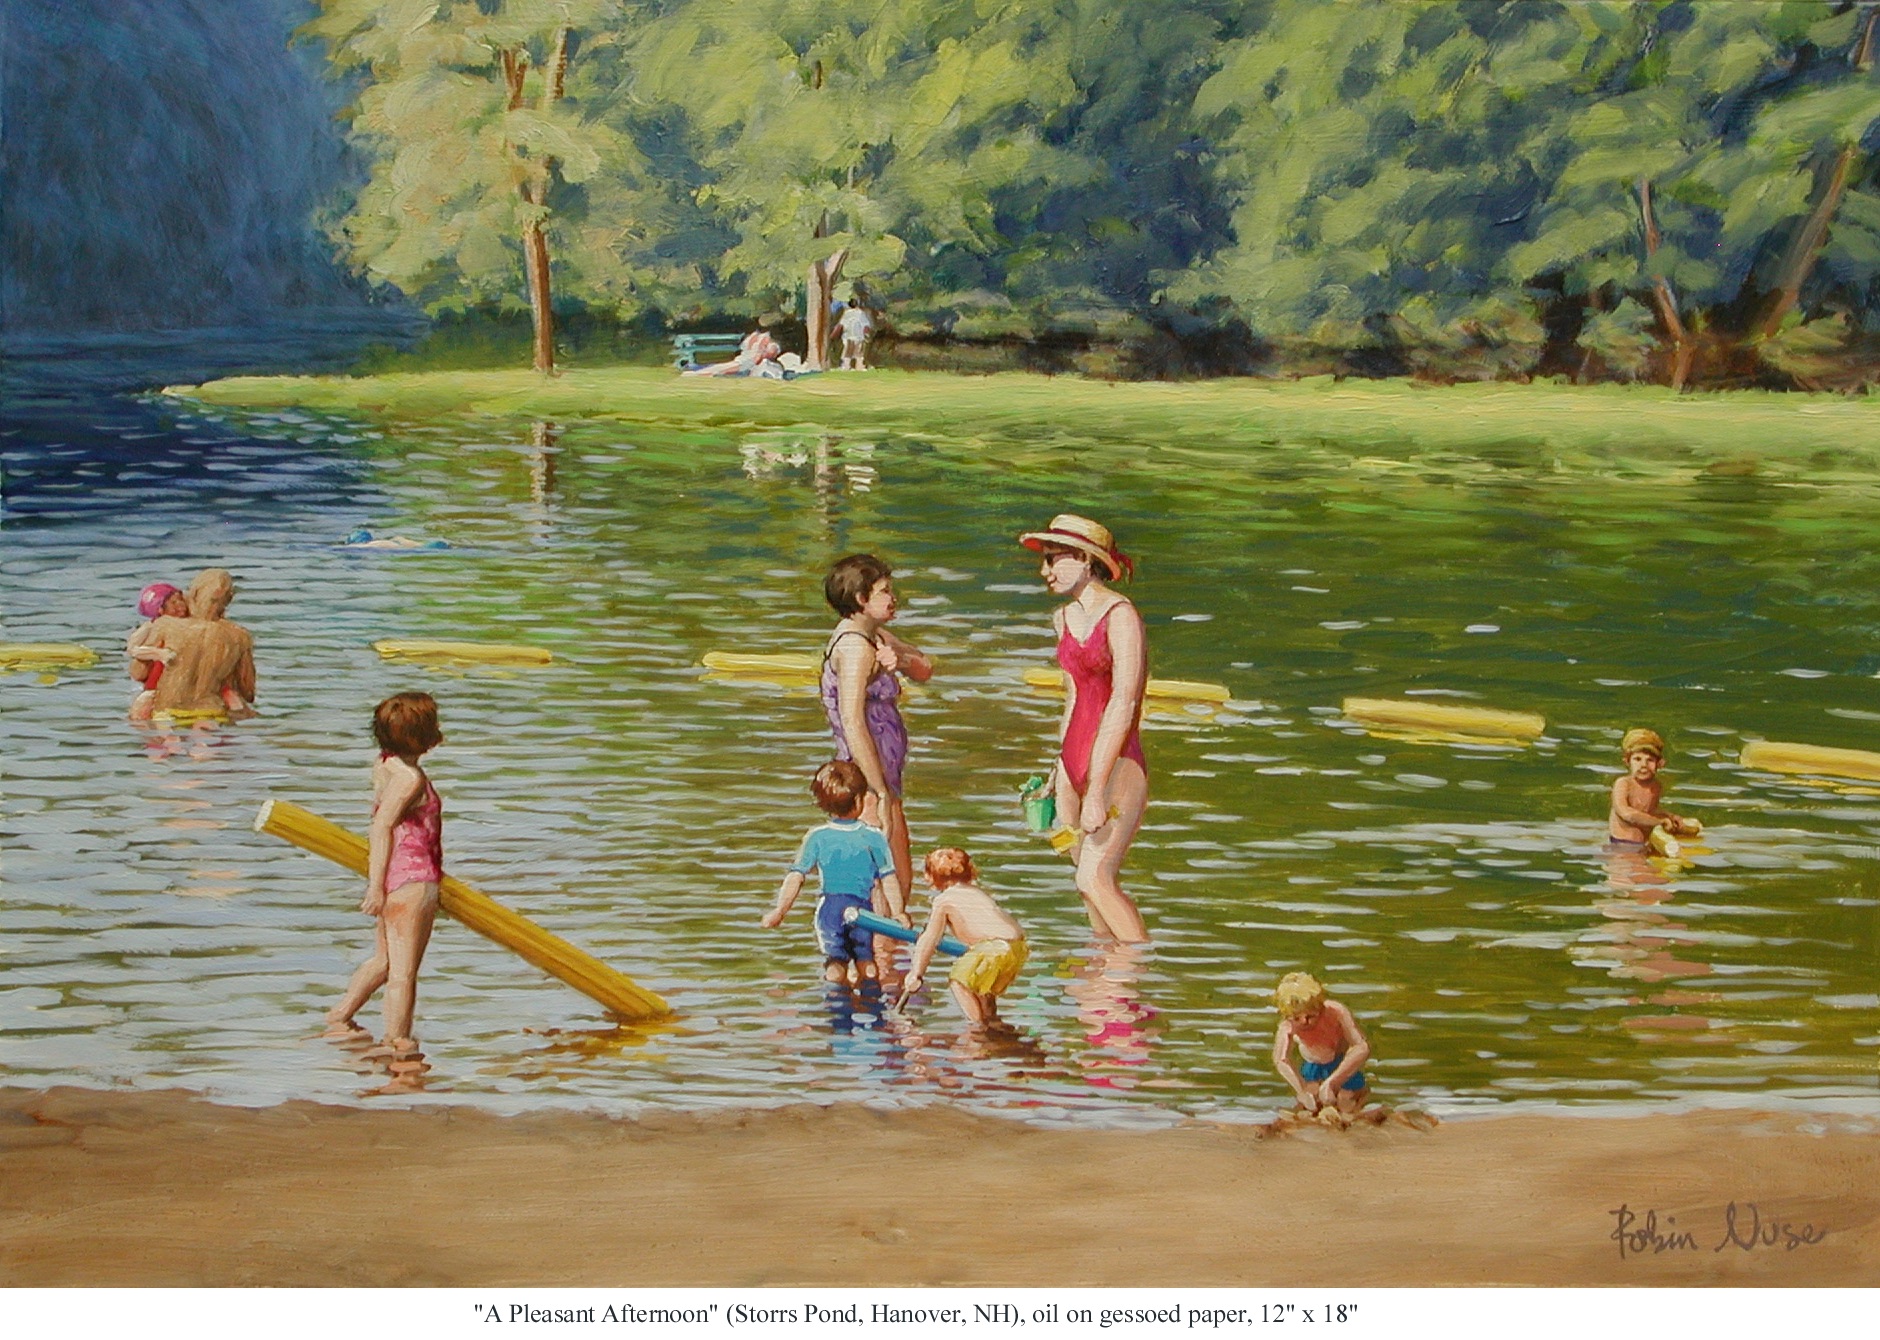 A painting of a beach area at a lush green pond. There are children playing near the shore and two women in bathing suits standing and chatting in the shallows.